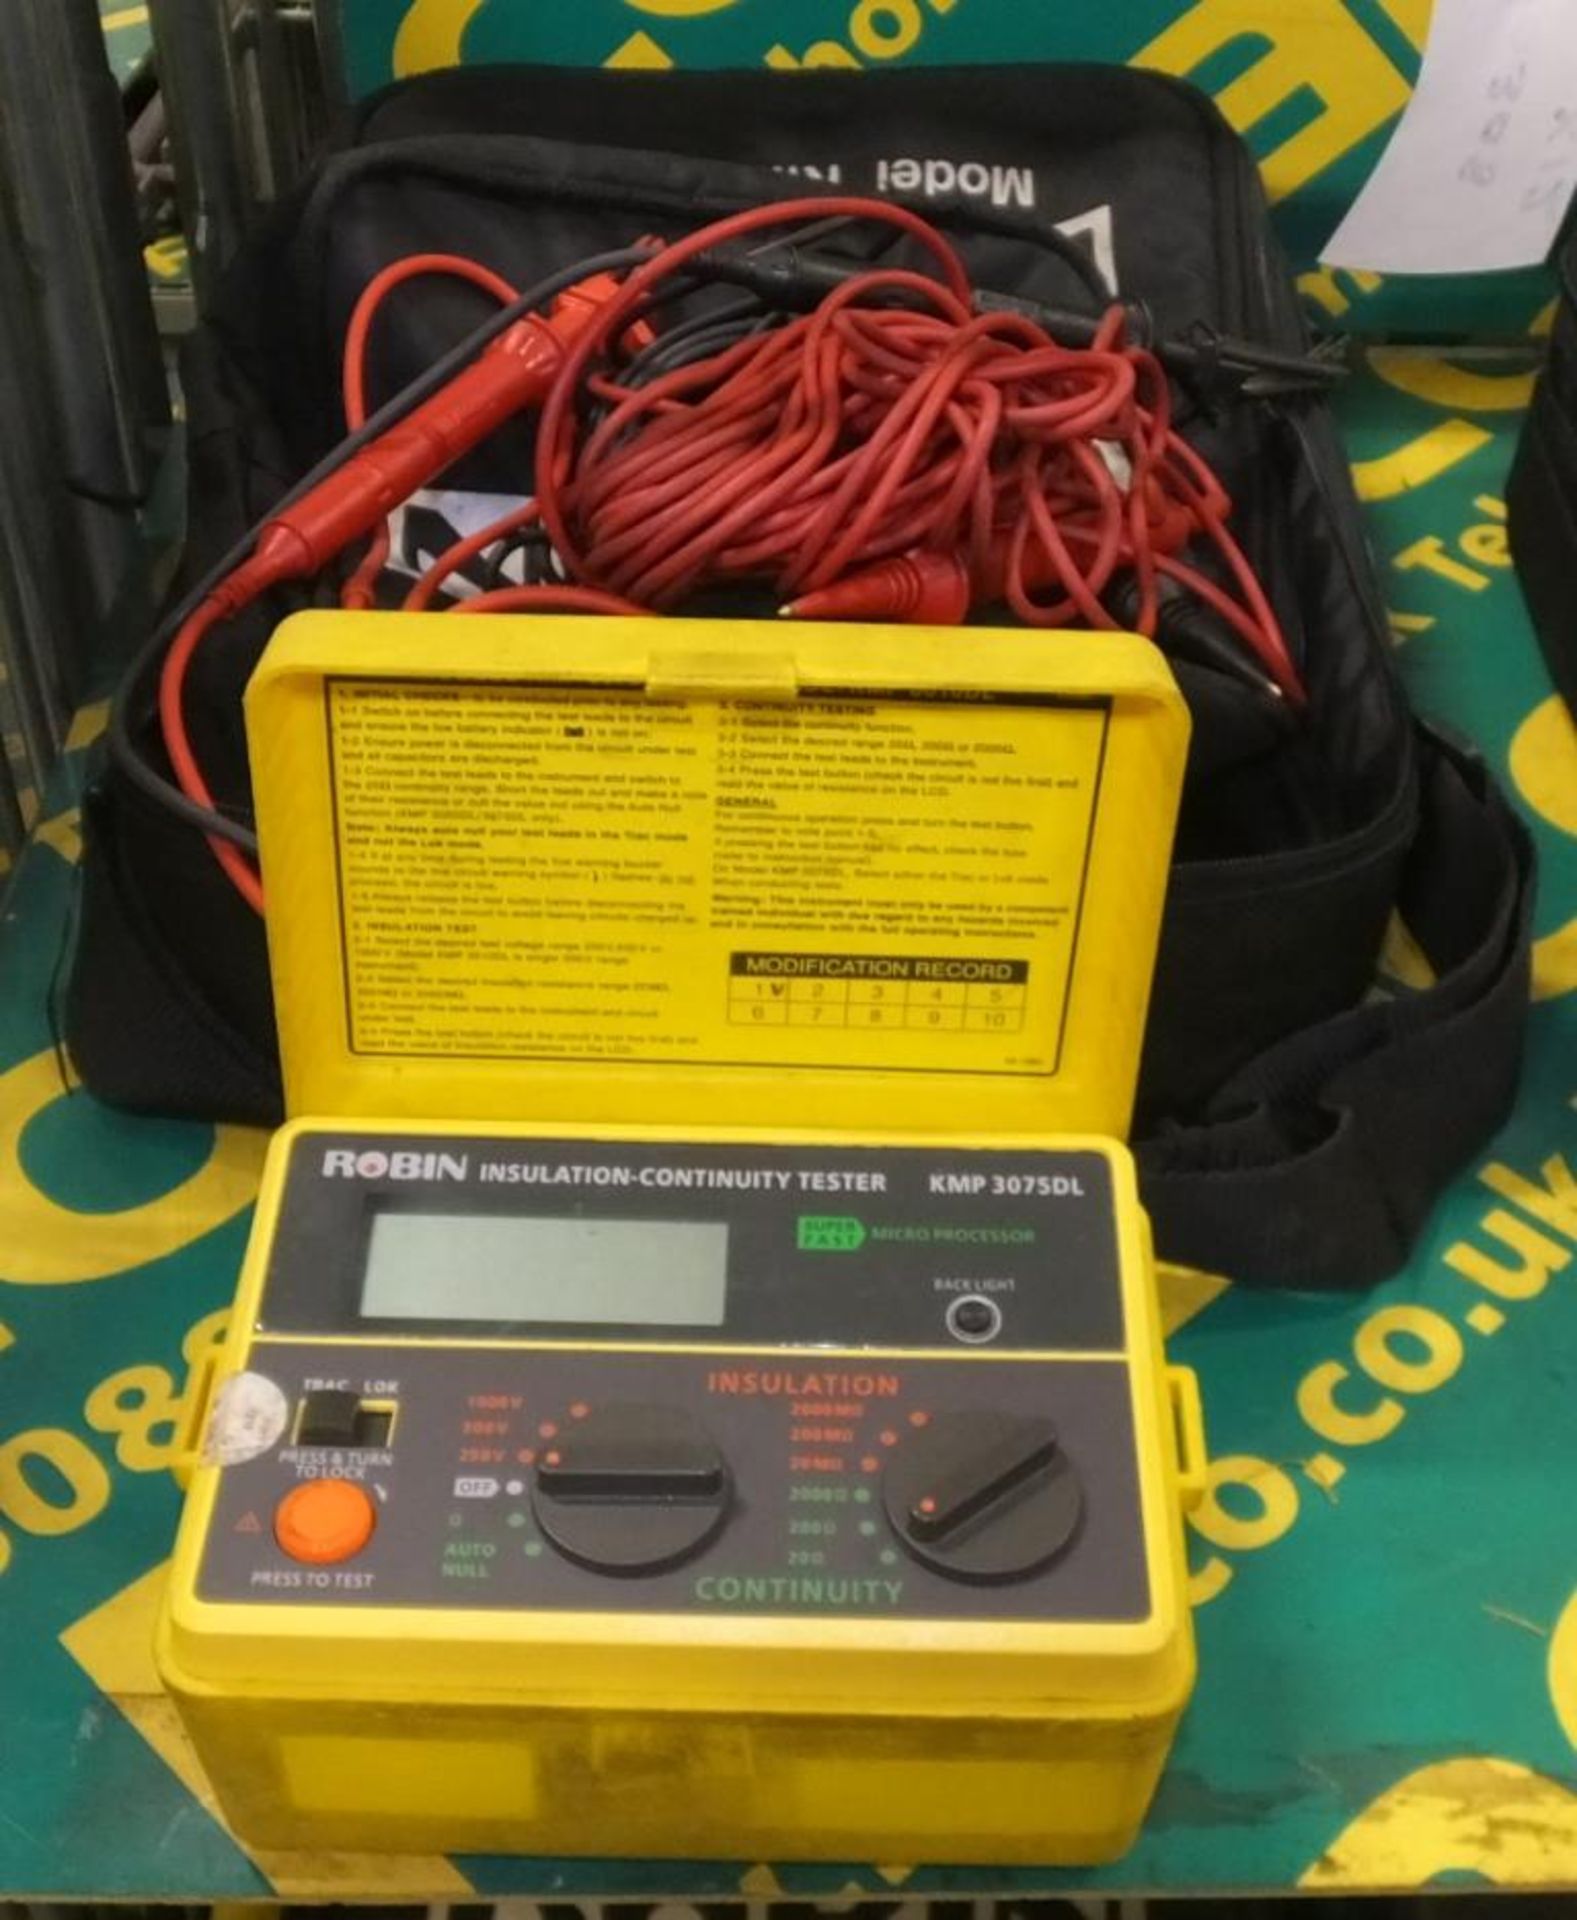 Robin Insulation Continuity Tester KMP 3075DL, cables and carry bag